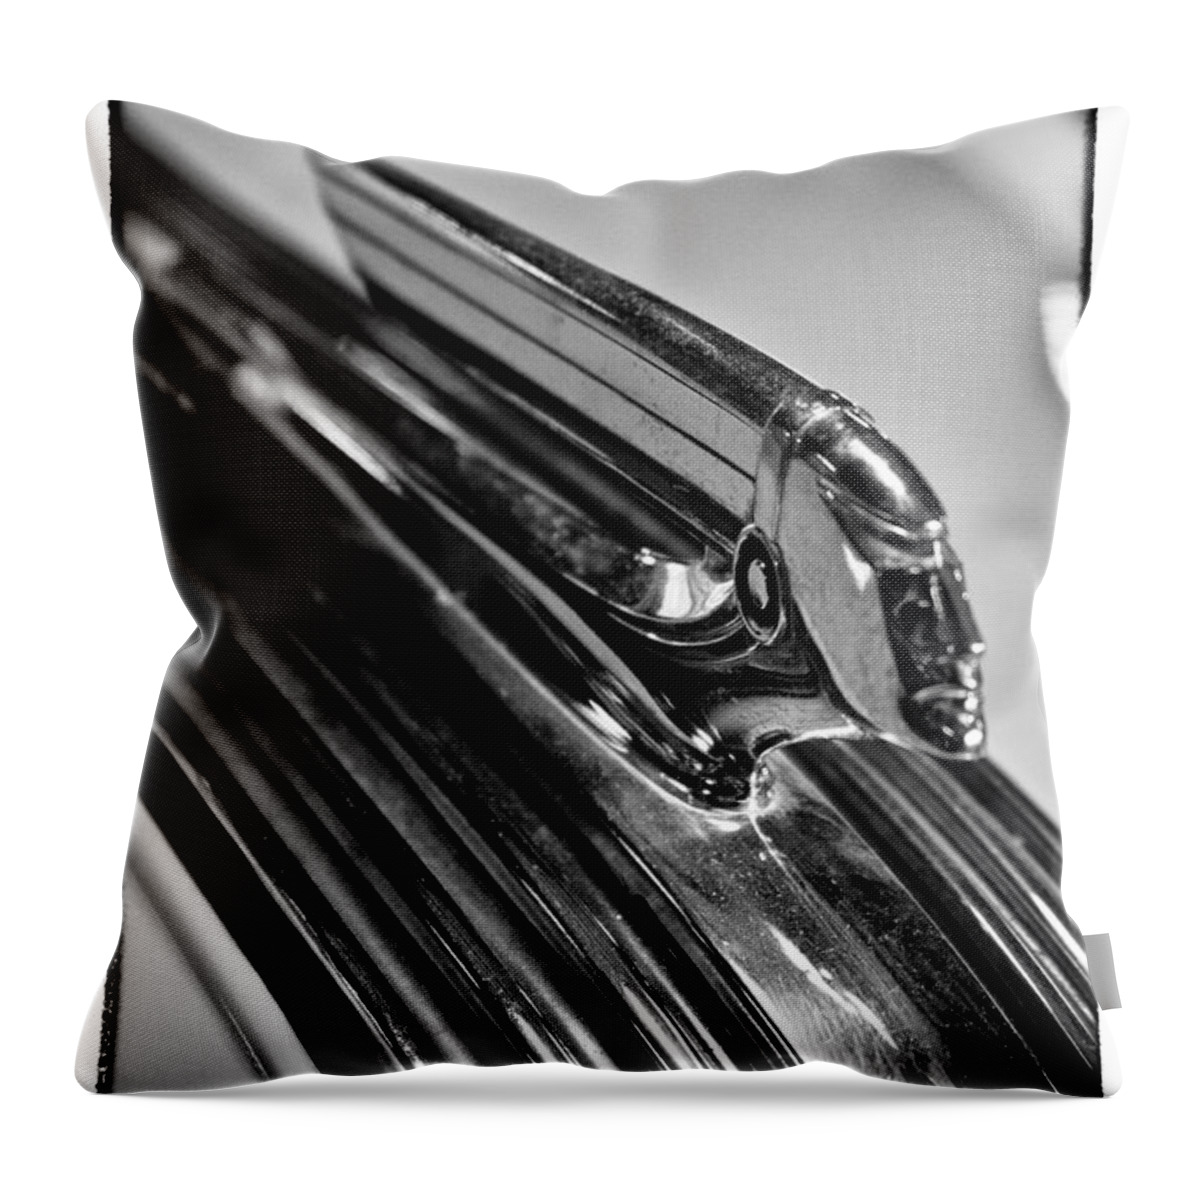 37 Throw Pillow featuring the photograph 1937 Pontiac Deluxe Eight #2 by David Patterson